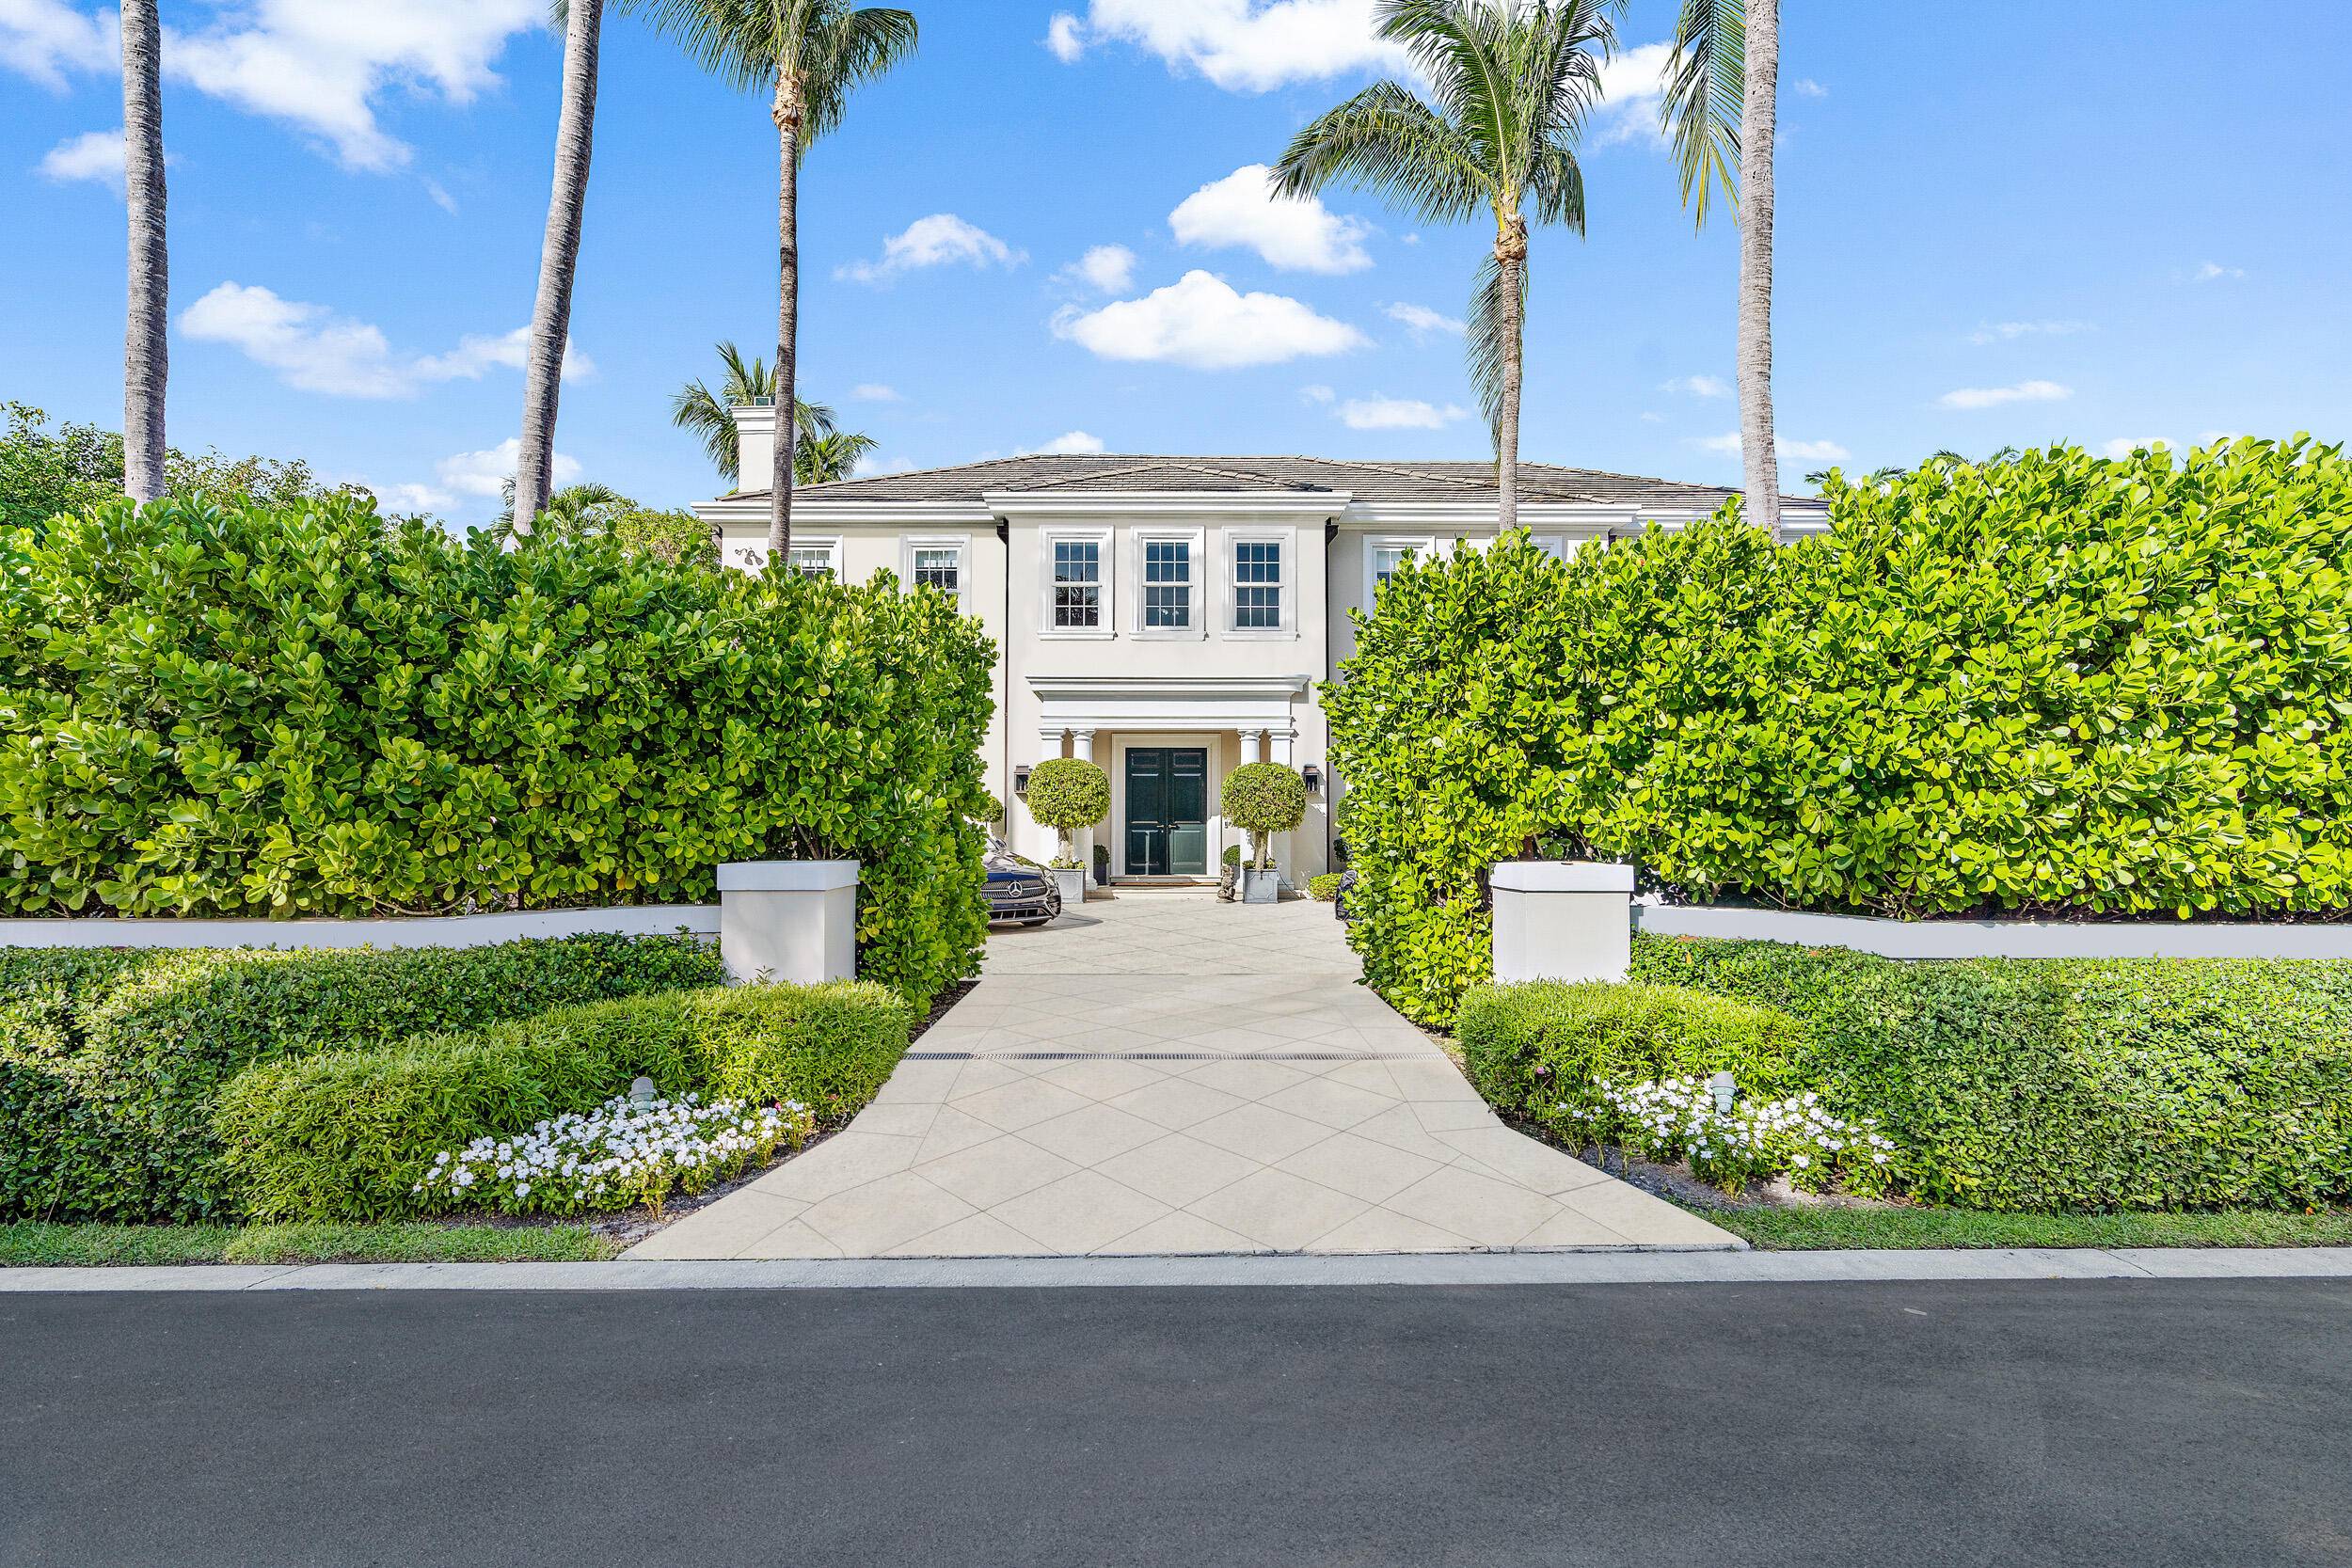 One of the most gracious homes in Palm Beach's estate section.